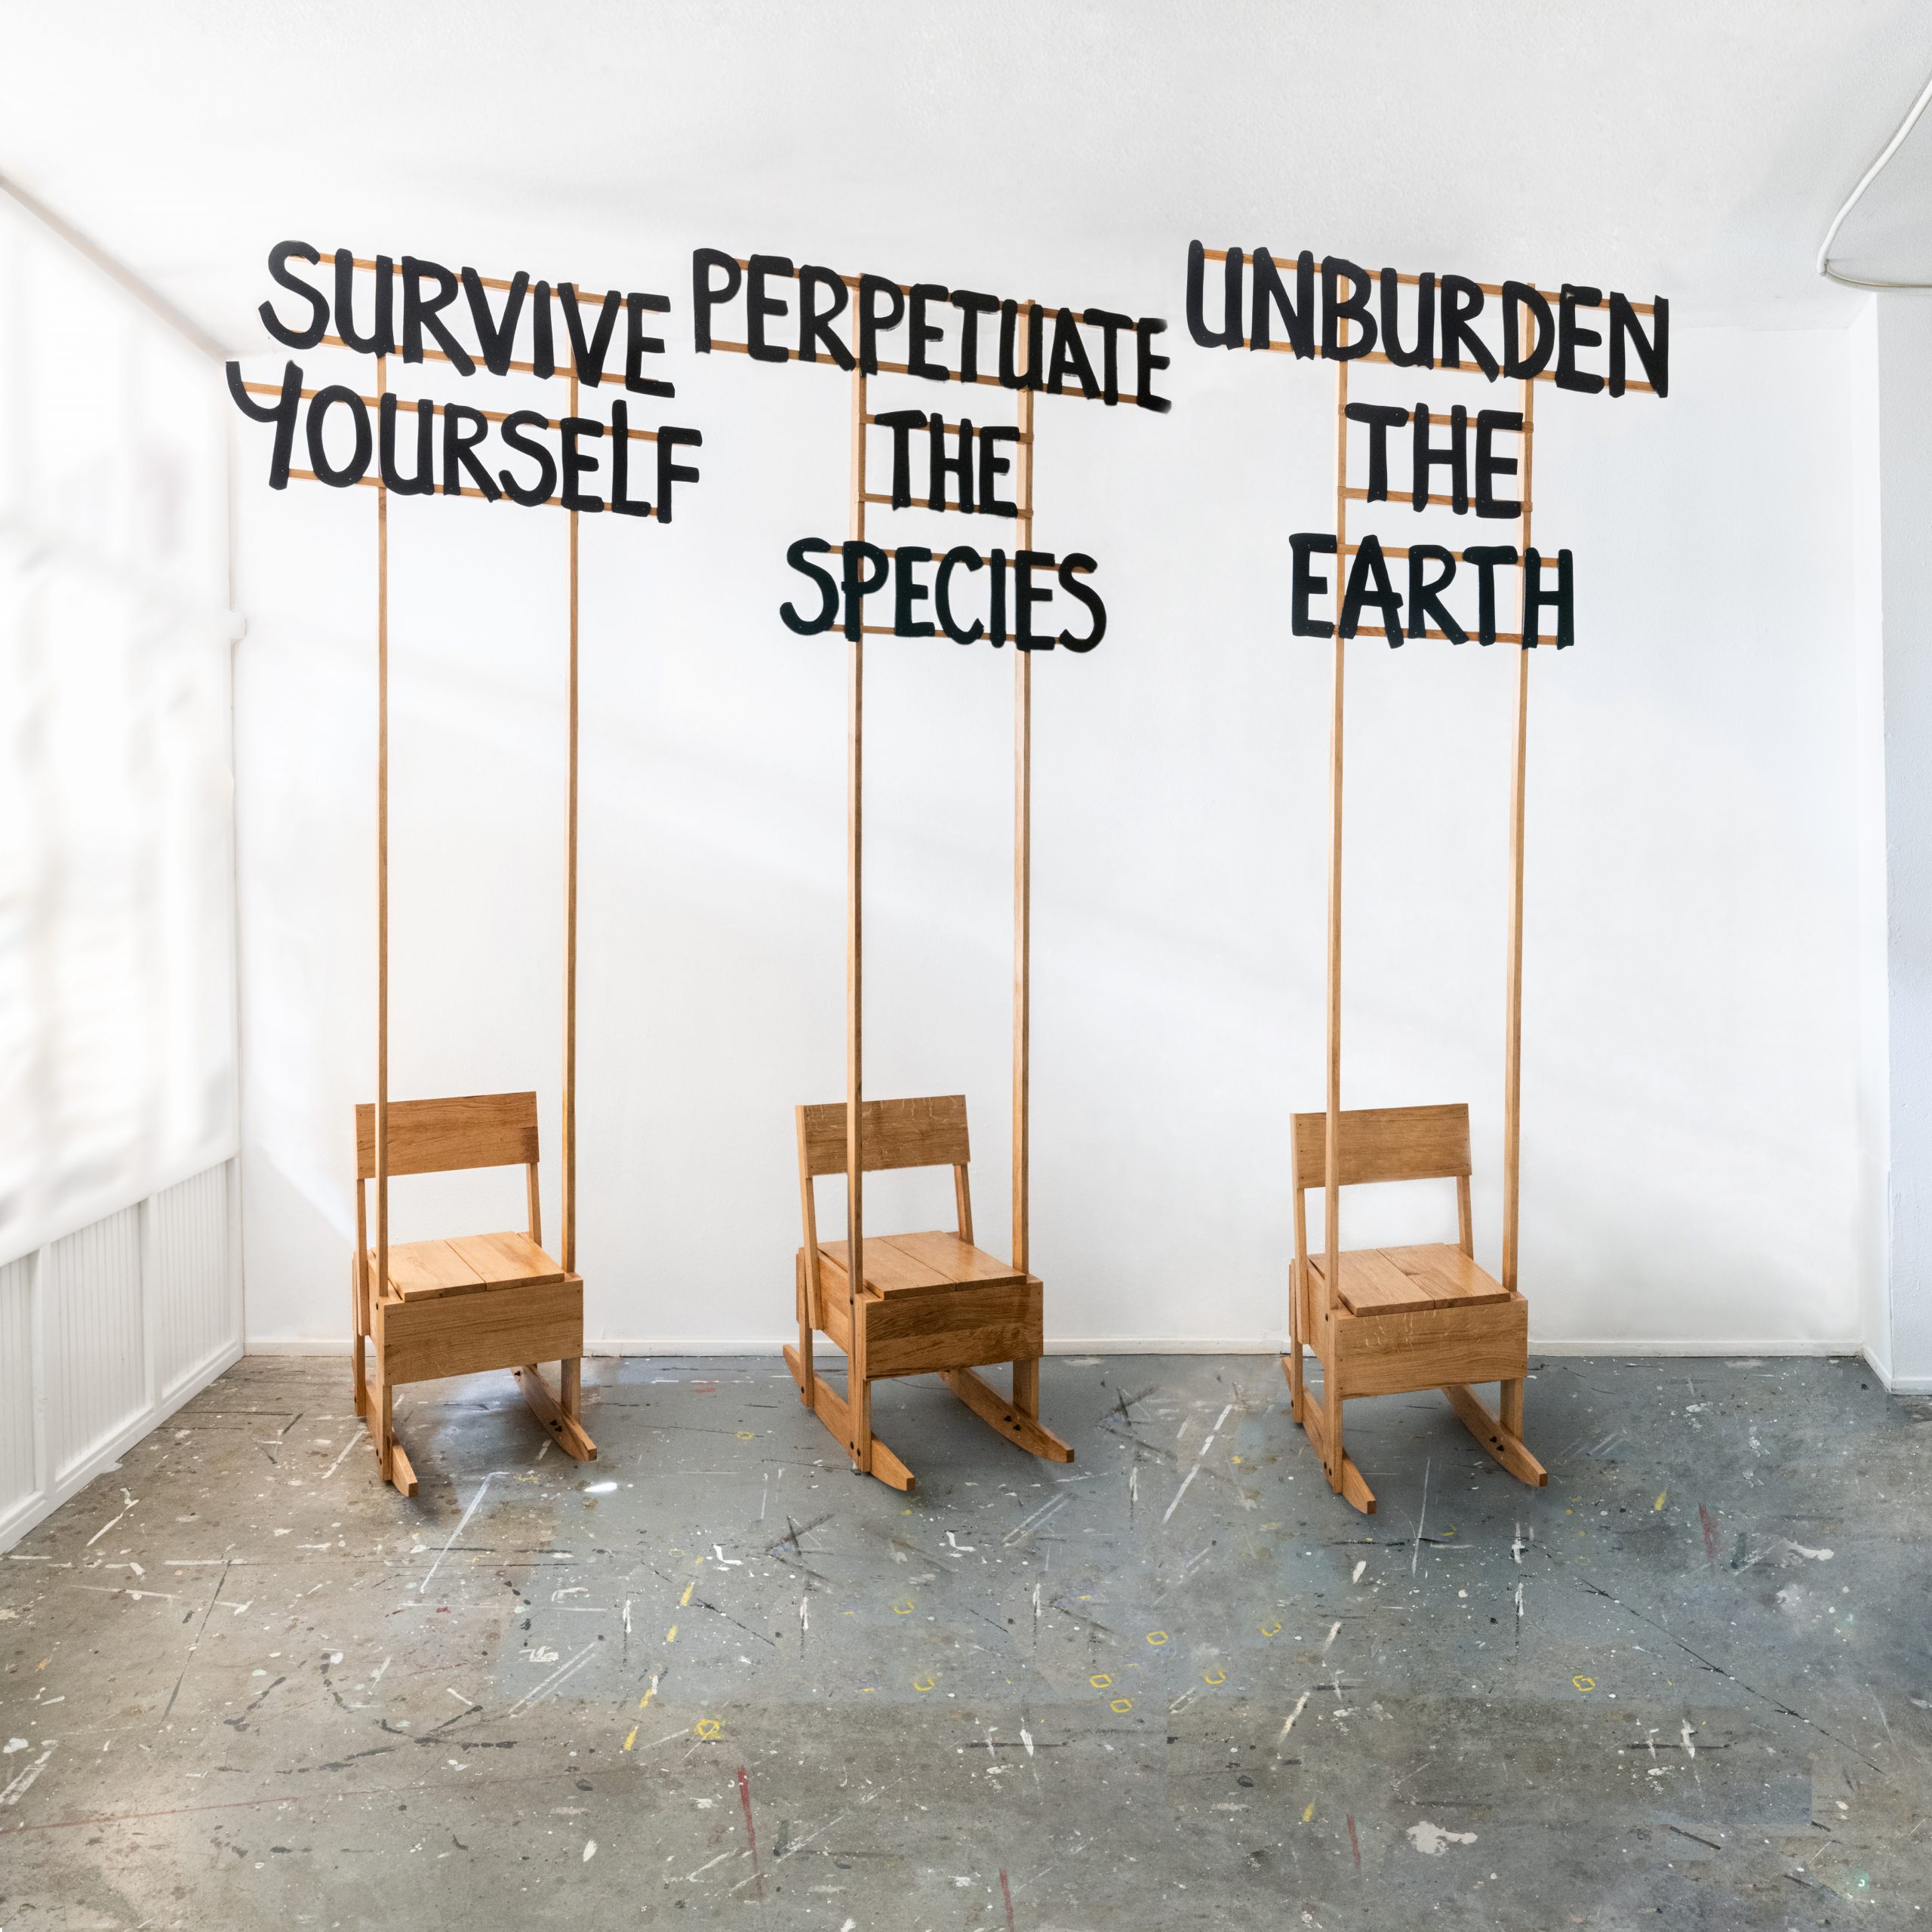 Birgit Verwer - Viriditas (SURVIVE YOURSELF, PERPETUATE THE SPECIES, UNBURDEN THE EARTH), 2021, rocking chairs made with wind sawn locally sourced oak , H300 x W125-140 x D92 cm per chair